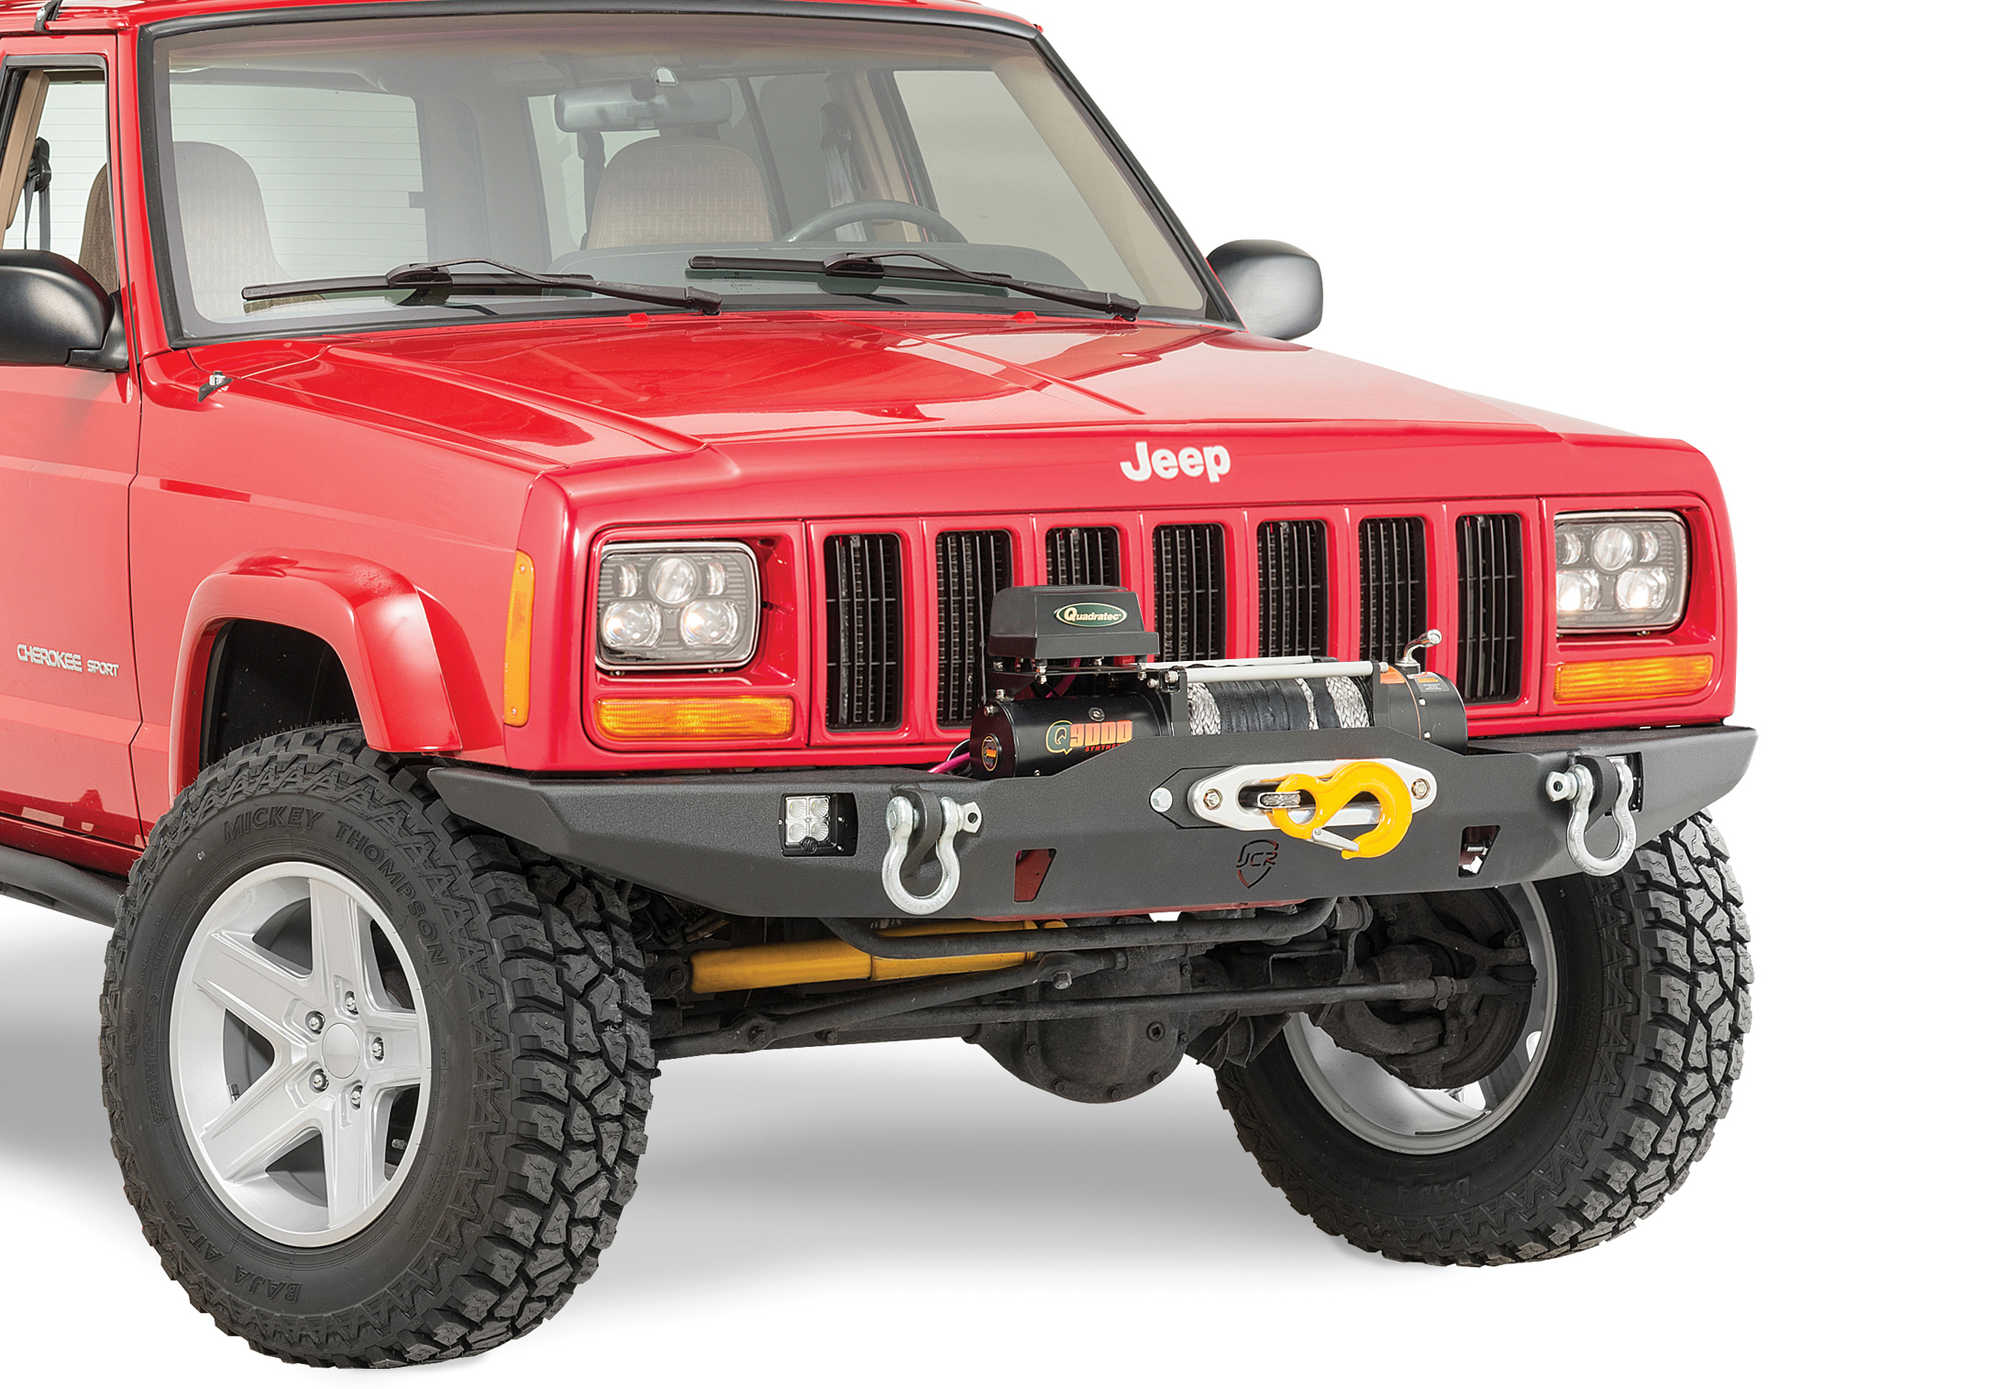 JCR Offroad Vanguard Front Winch Bumper for 8401 Jeep